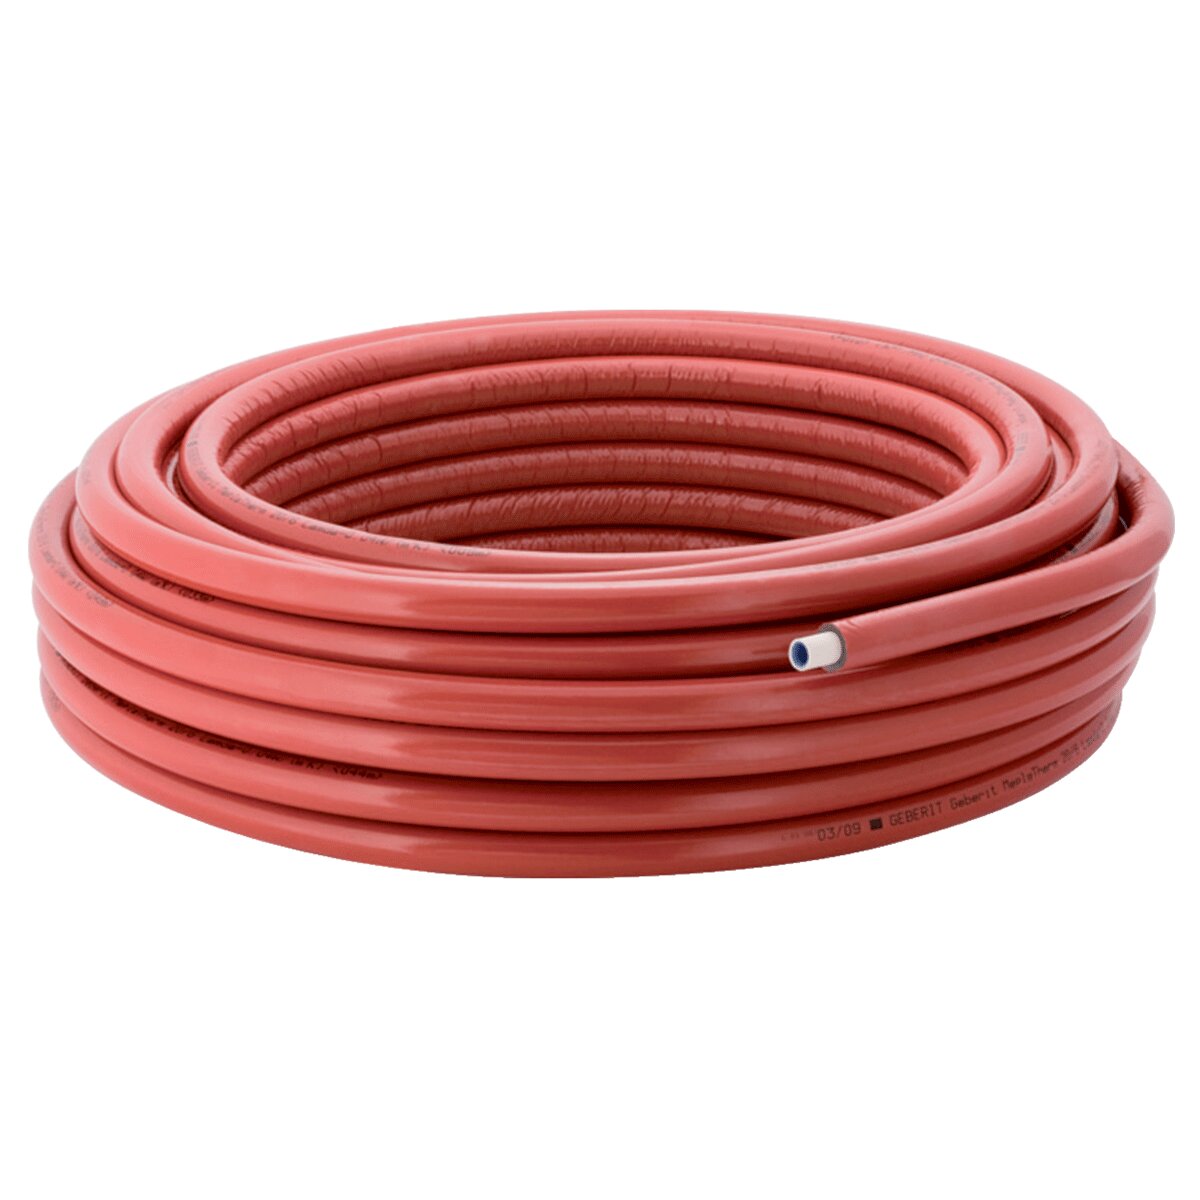 Geberit Mepla Therm multilayer pipe Ø20x6 with 6 mm insulating sheath - For heating